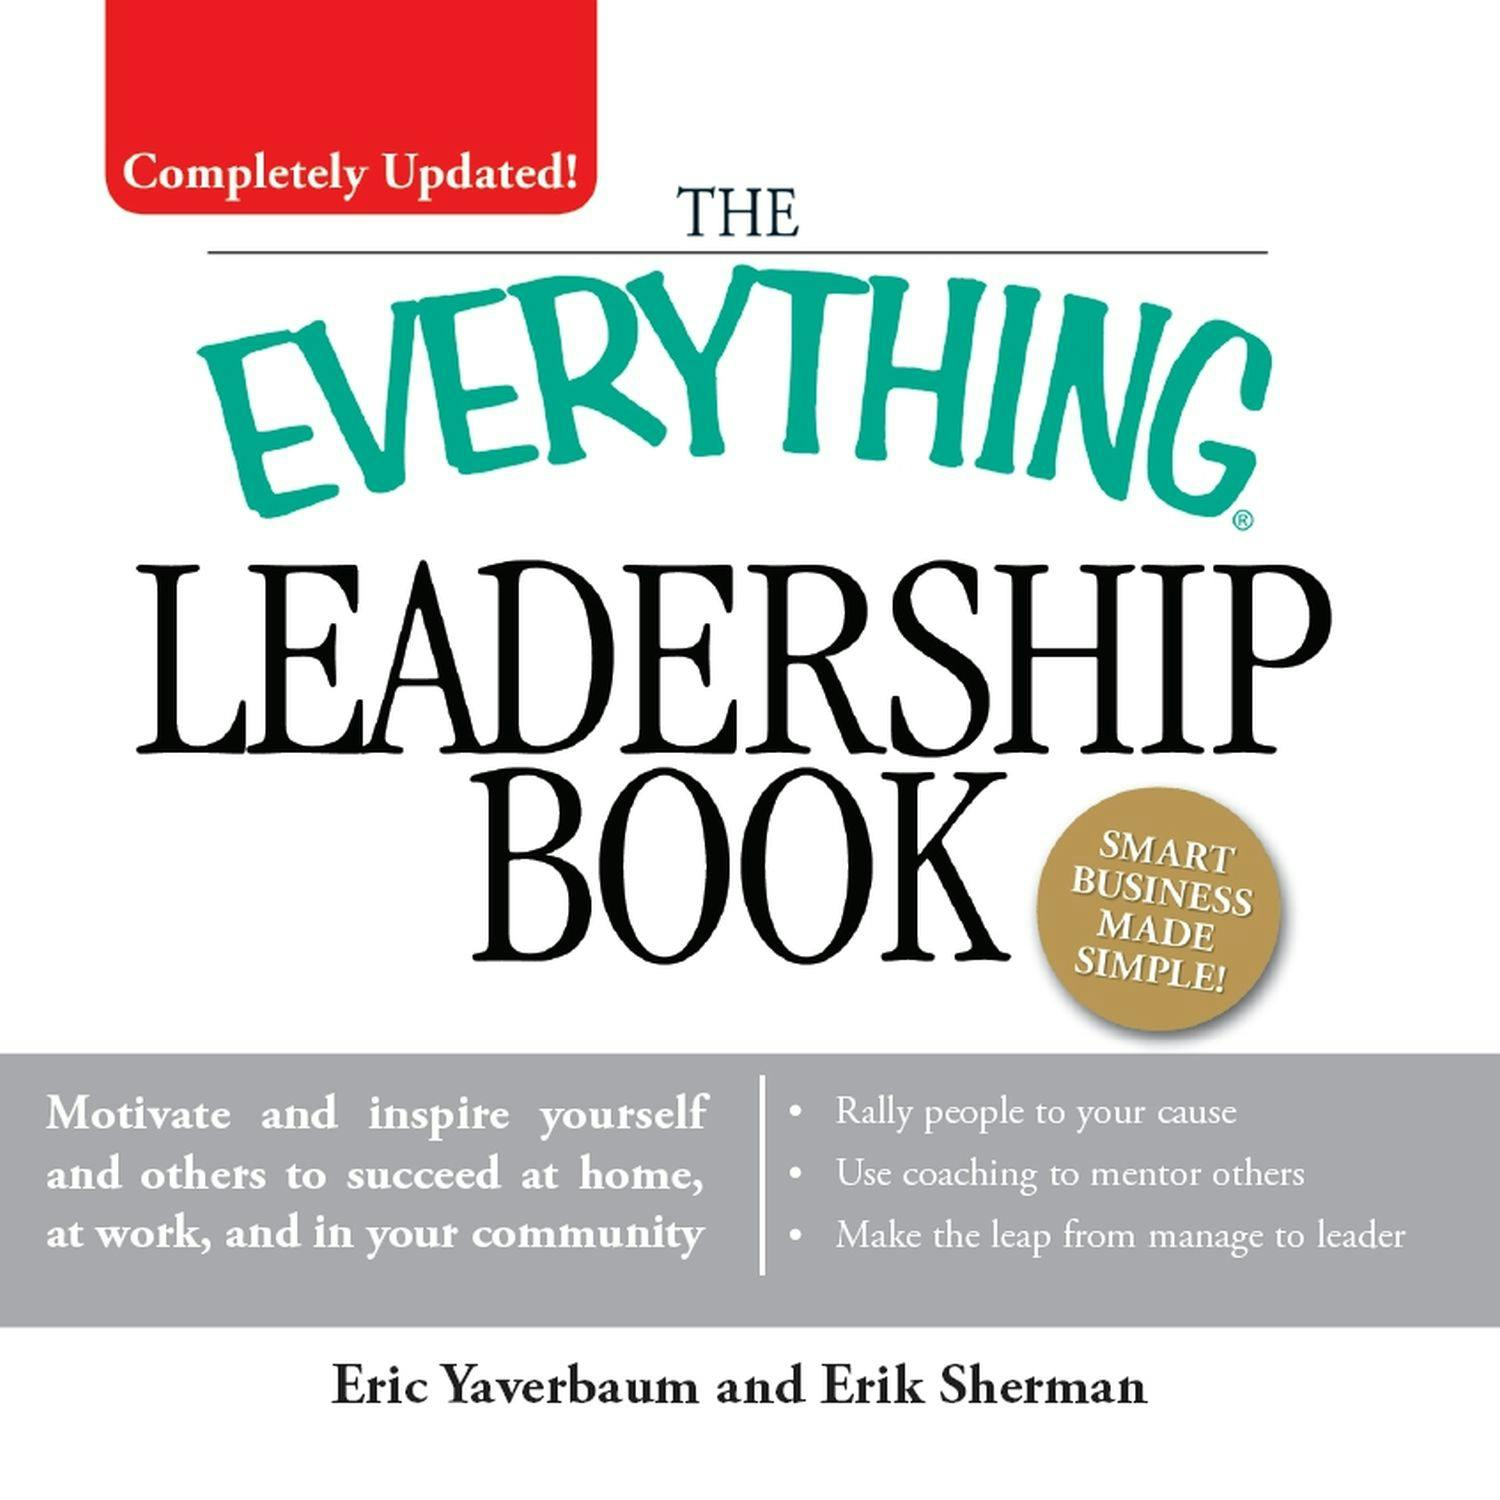 The Everything Leadership Book - undefined